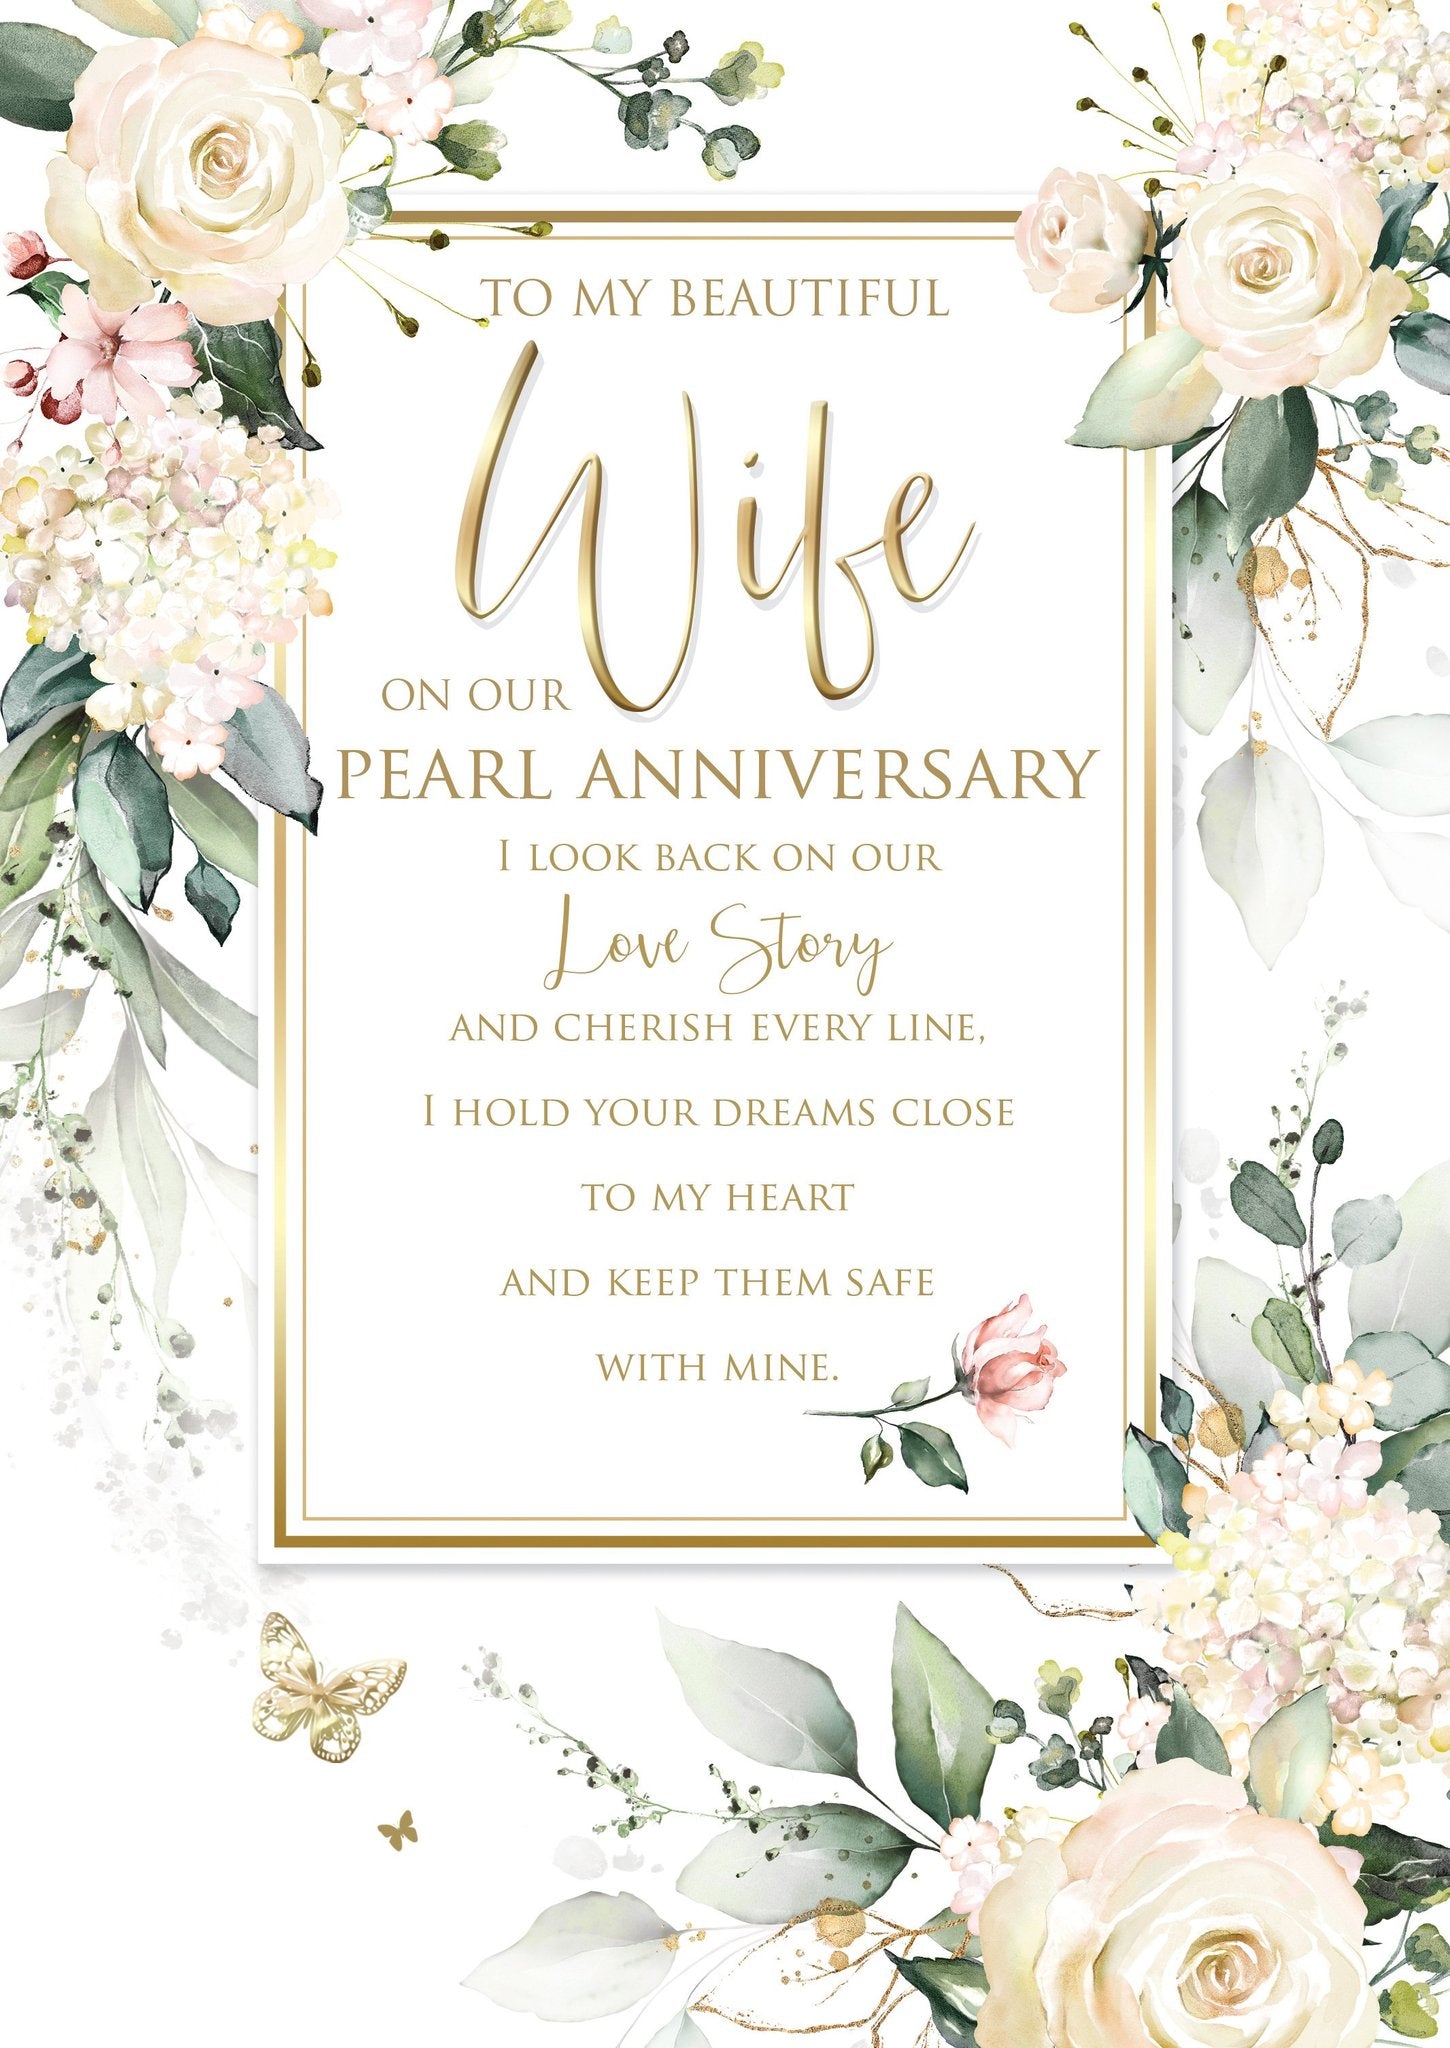 Wife 30th Wedding Anniversary Card - Heartfelt Words of Love and Endearing Design